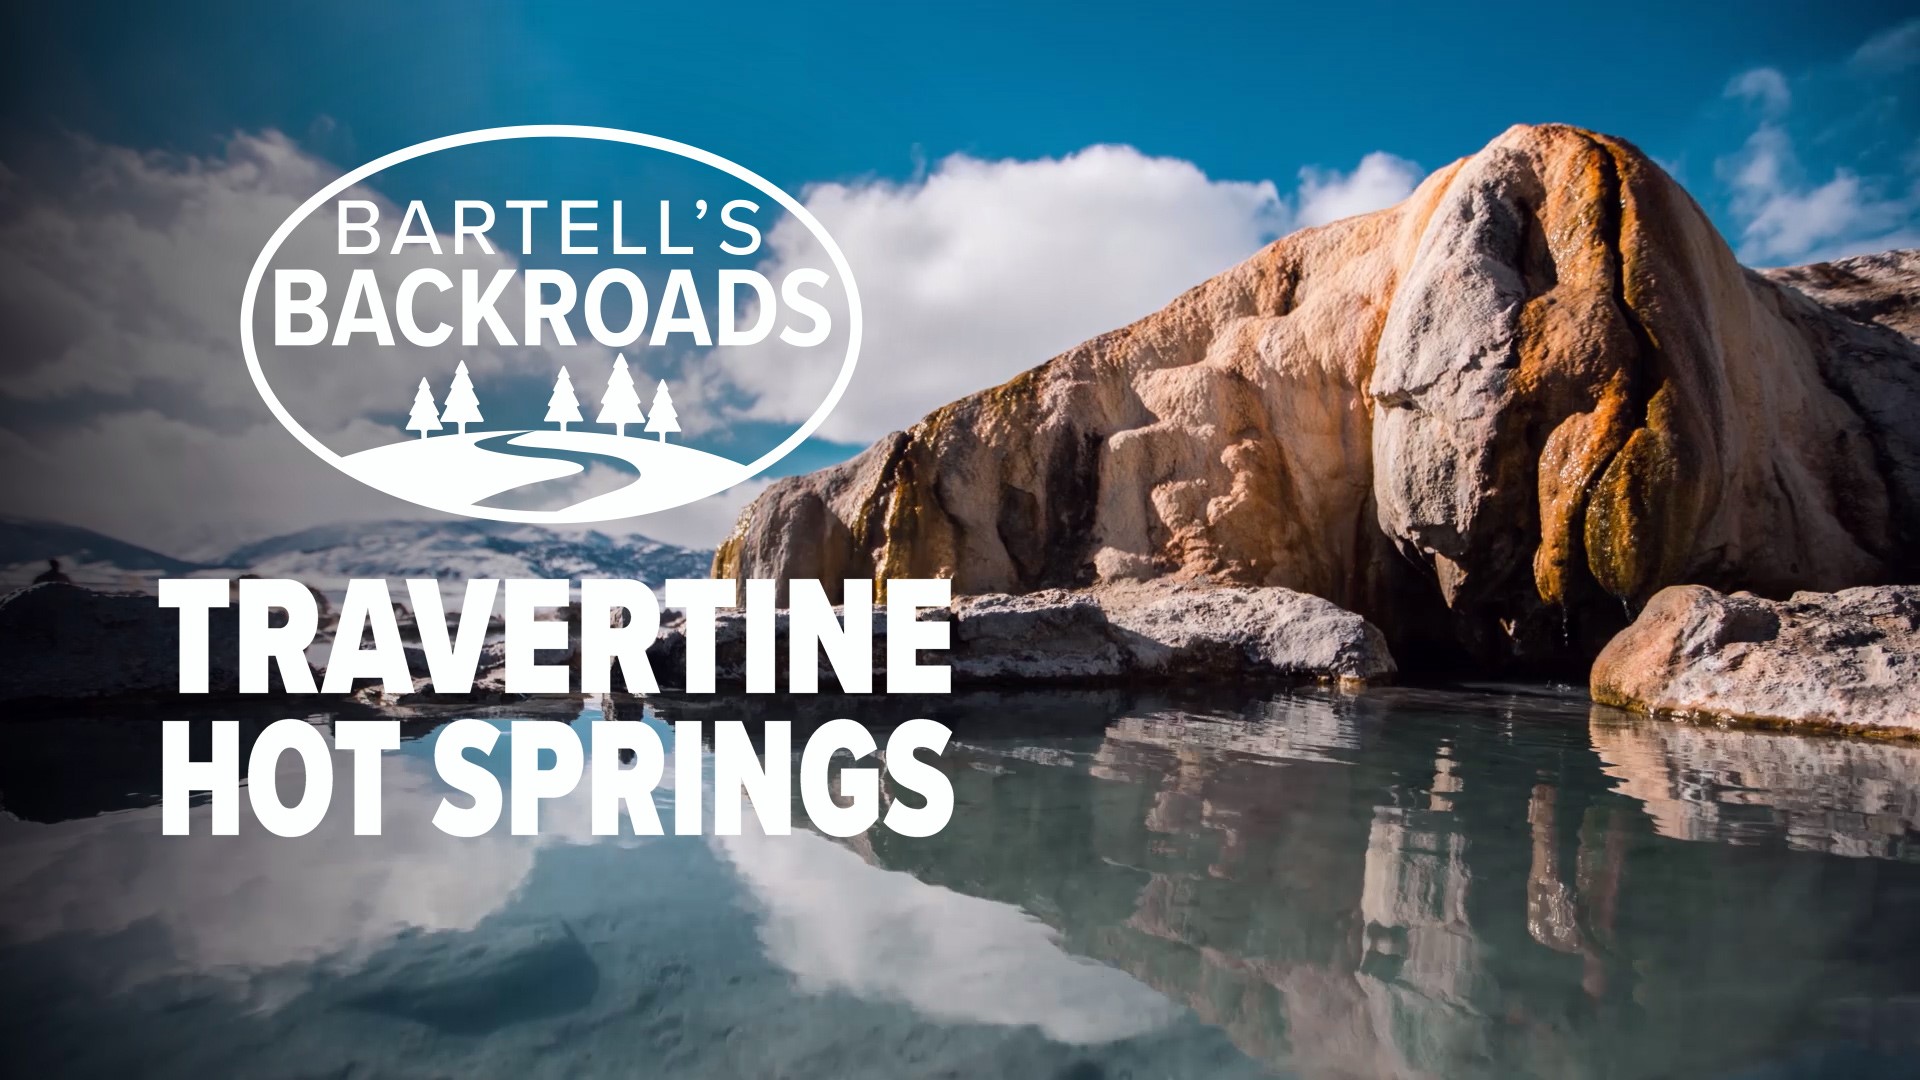 Decades ago it was a spiritual place for Native Americans. Today it is often treated like a bathtub by tourists. John hits the backroads to tell the sad story of the Travertine Hot Springs.